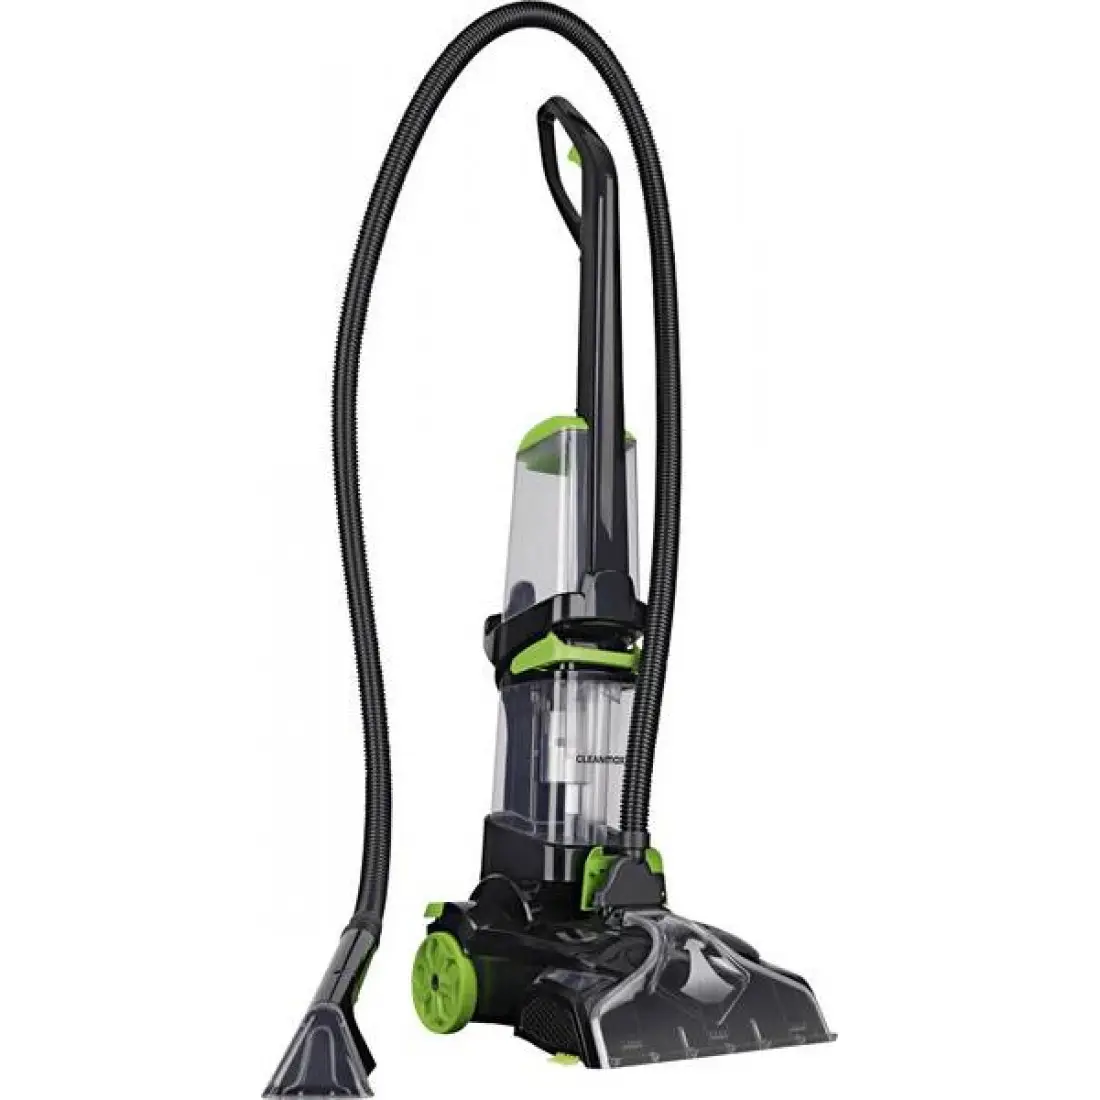 Compass3 in 1 Powerful Suction Portable Carpet Washer Cleaning Equipment Vacuum Cleaner